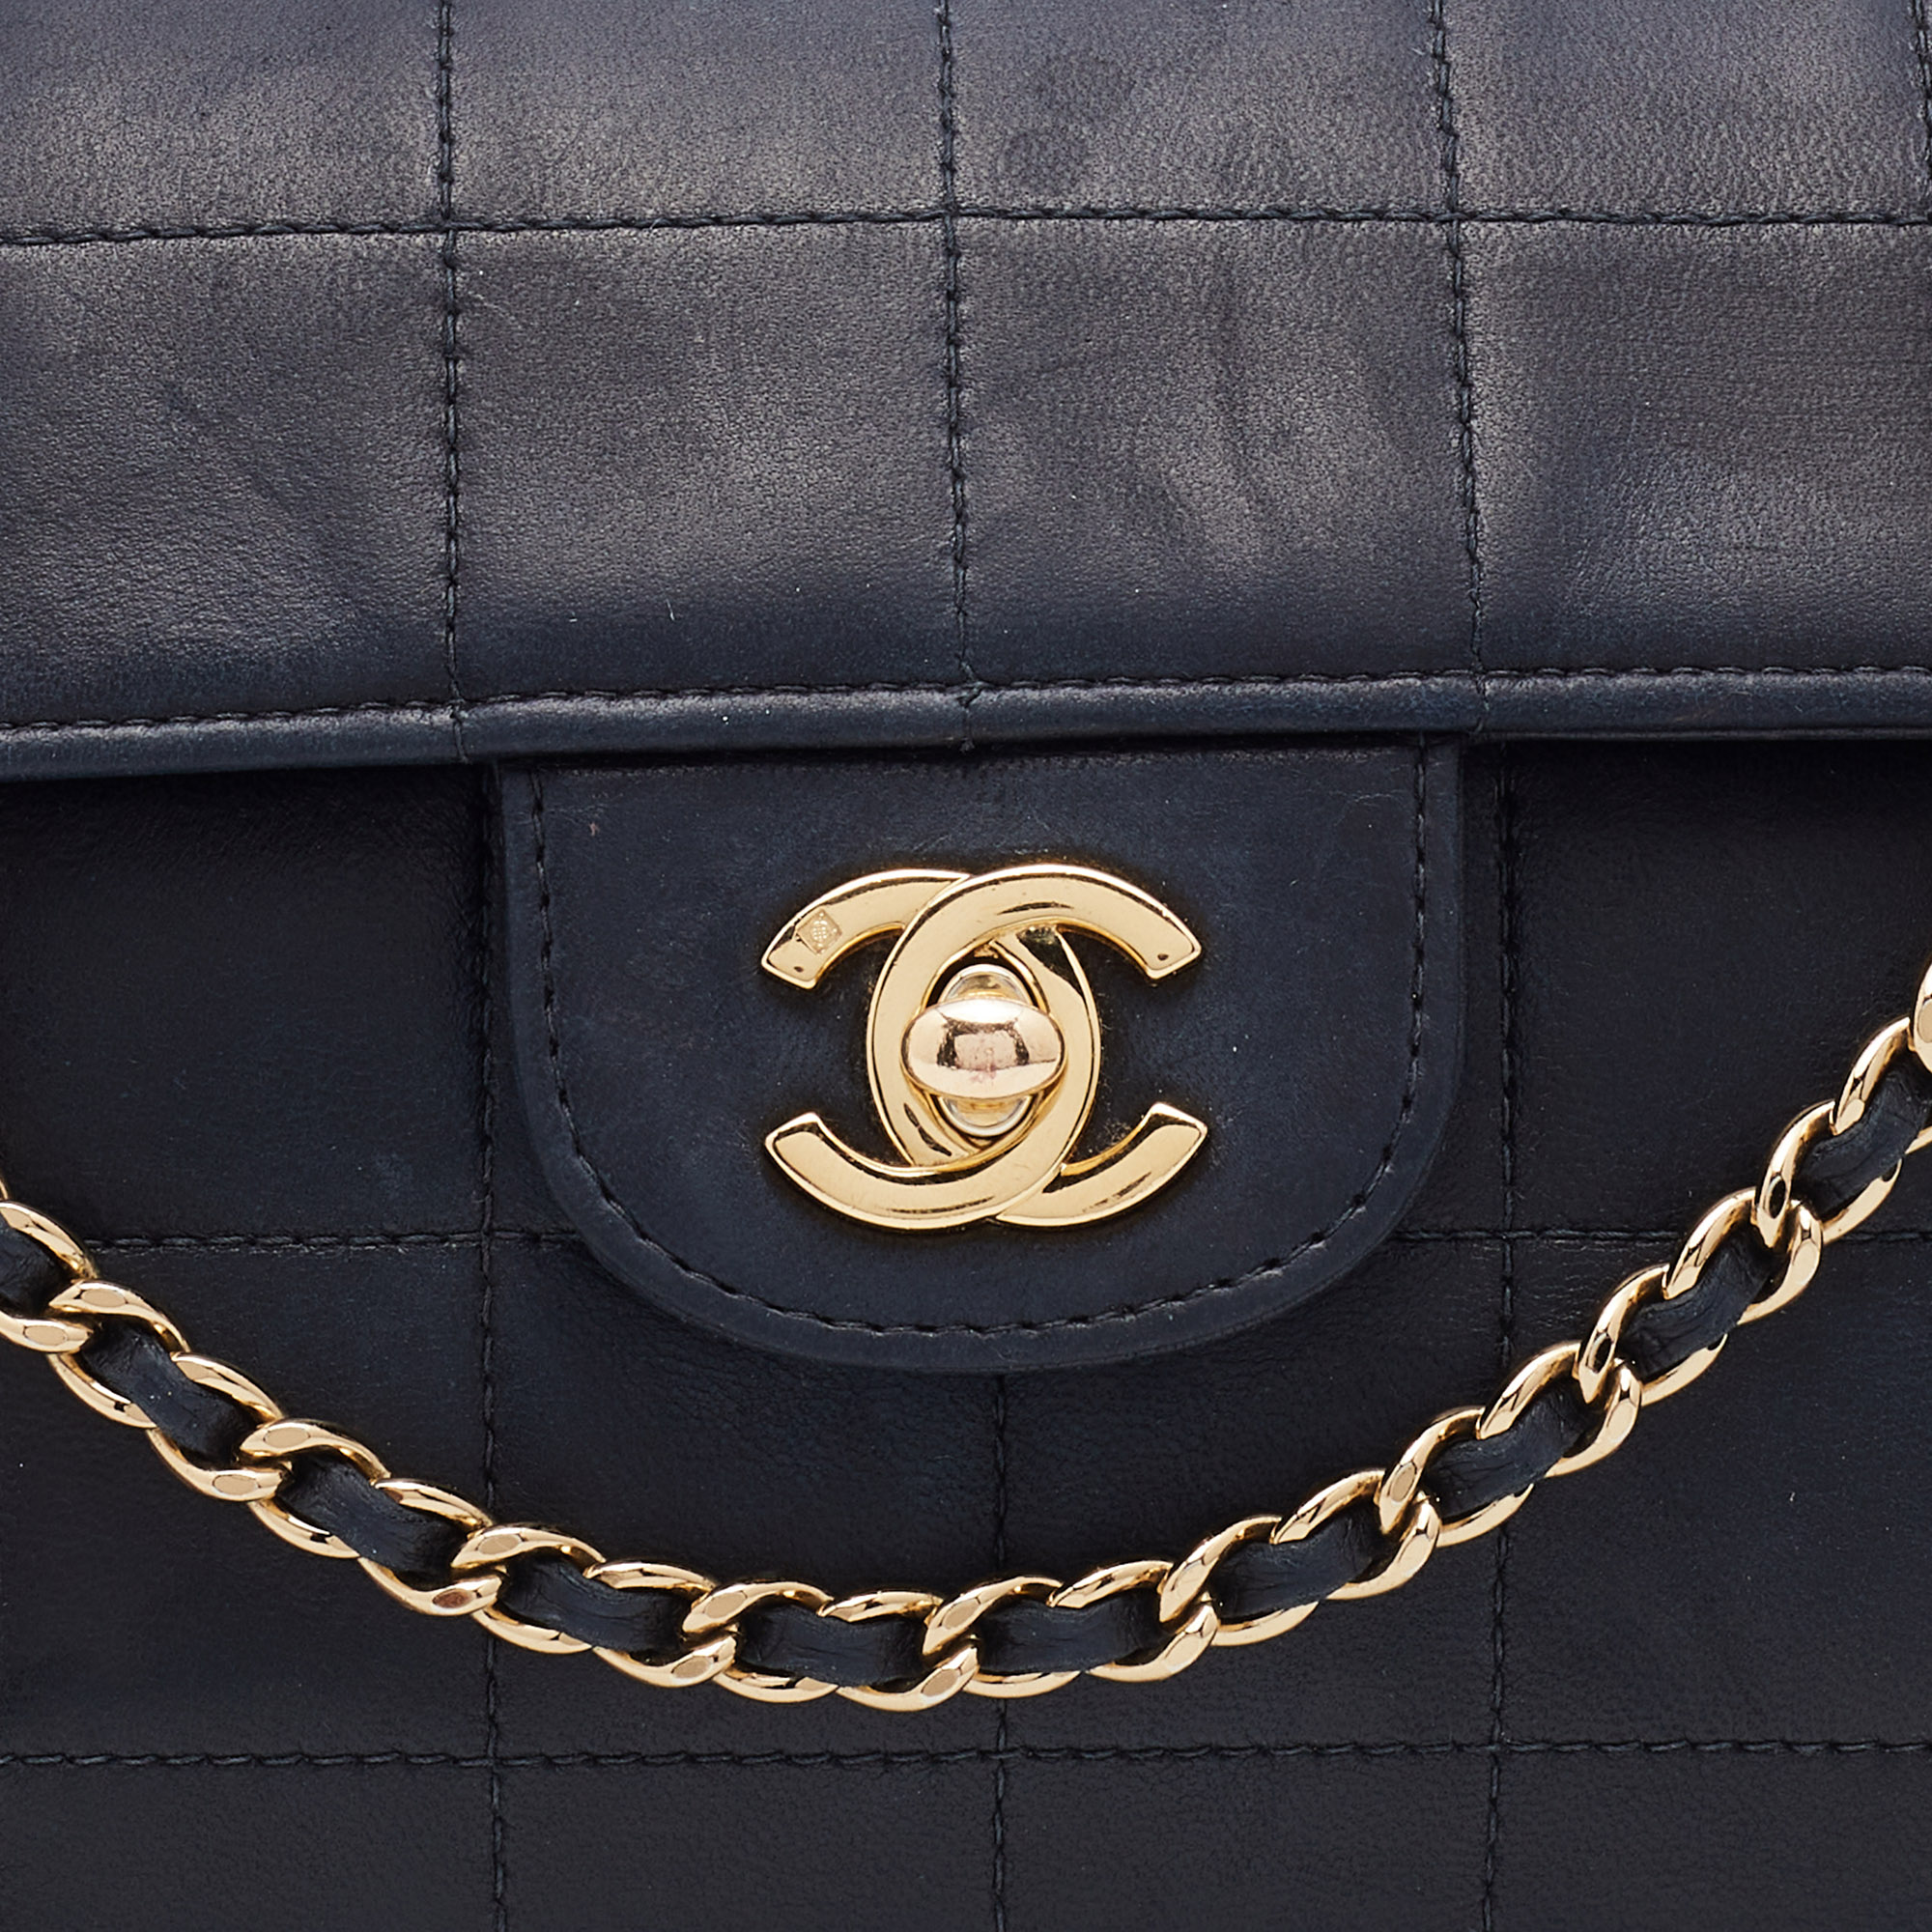 Black Chanel Leather Bag with Leather Logo — Harriett's Closet